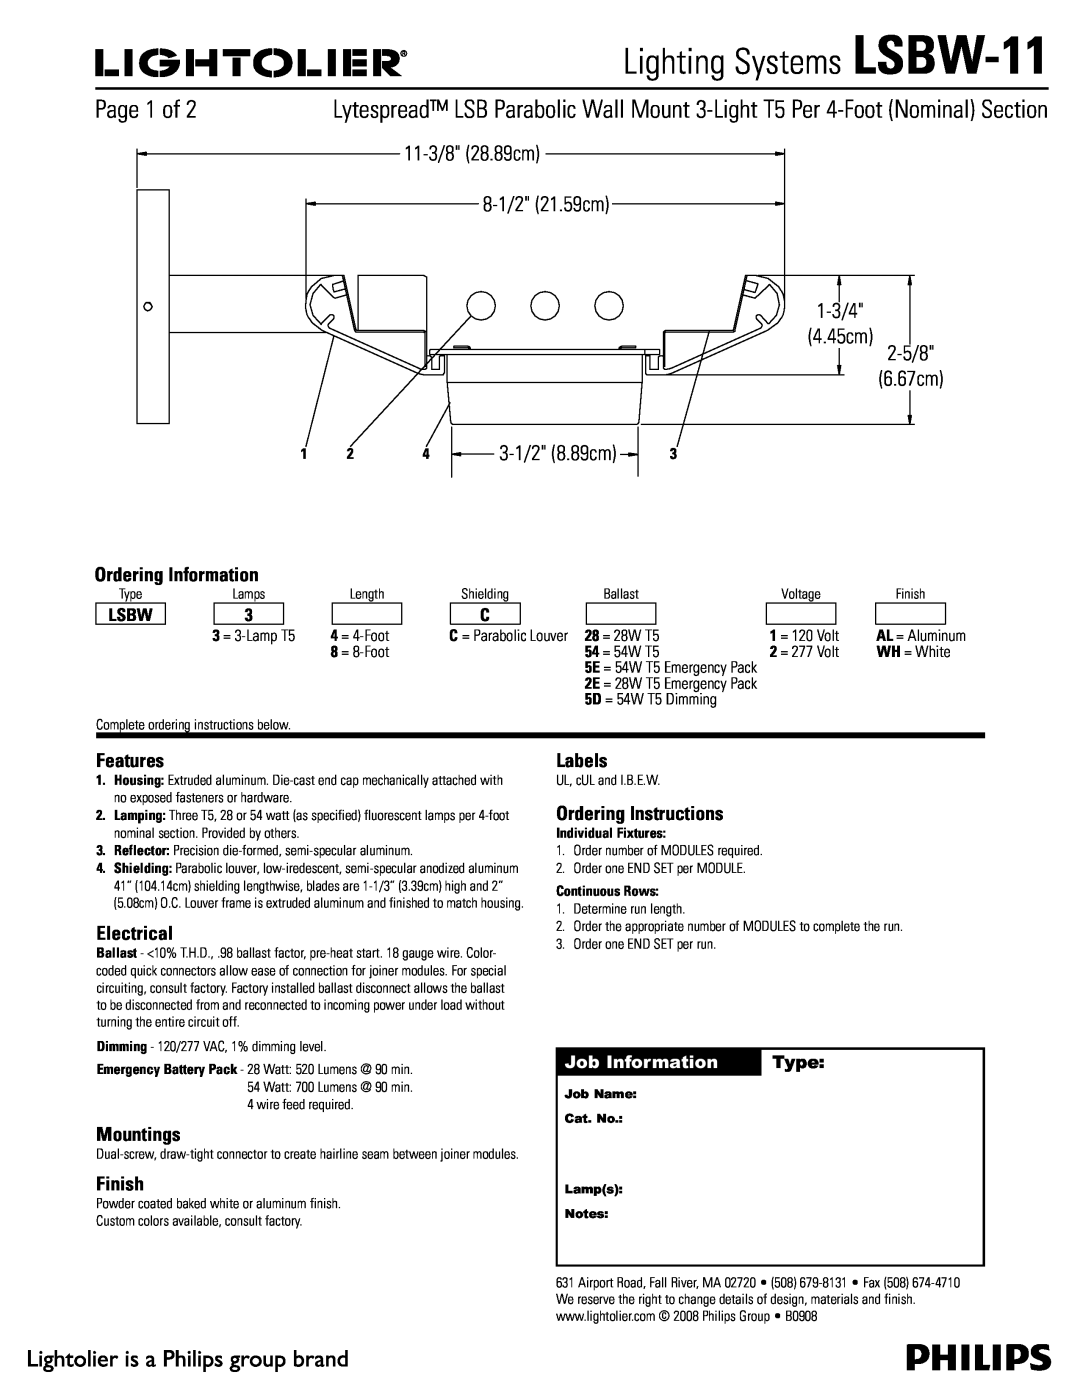 Lightolier manual Lighting Systems LSBW-11, Ordering Information, Features, Electrical, Mountings, Finish, Labels, Type 